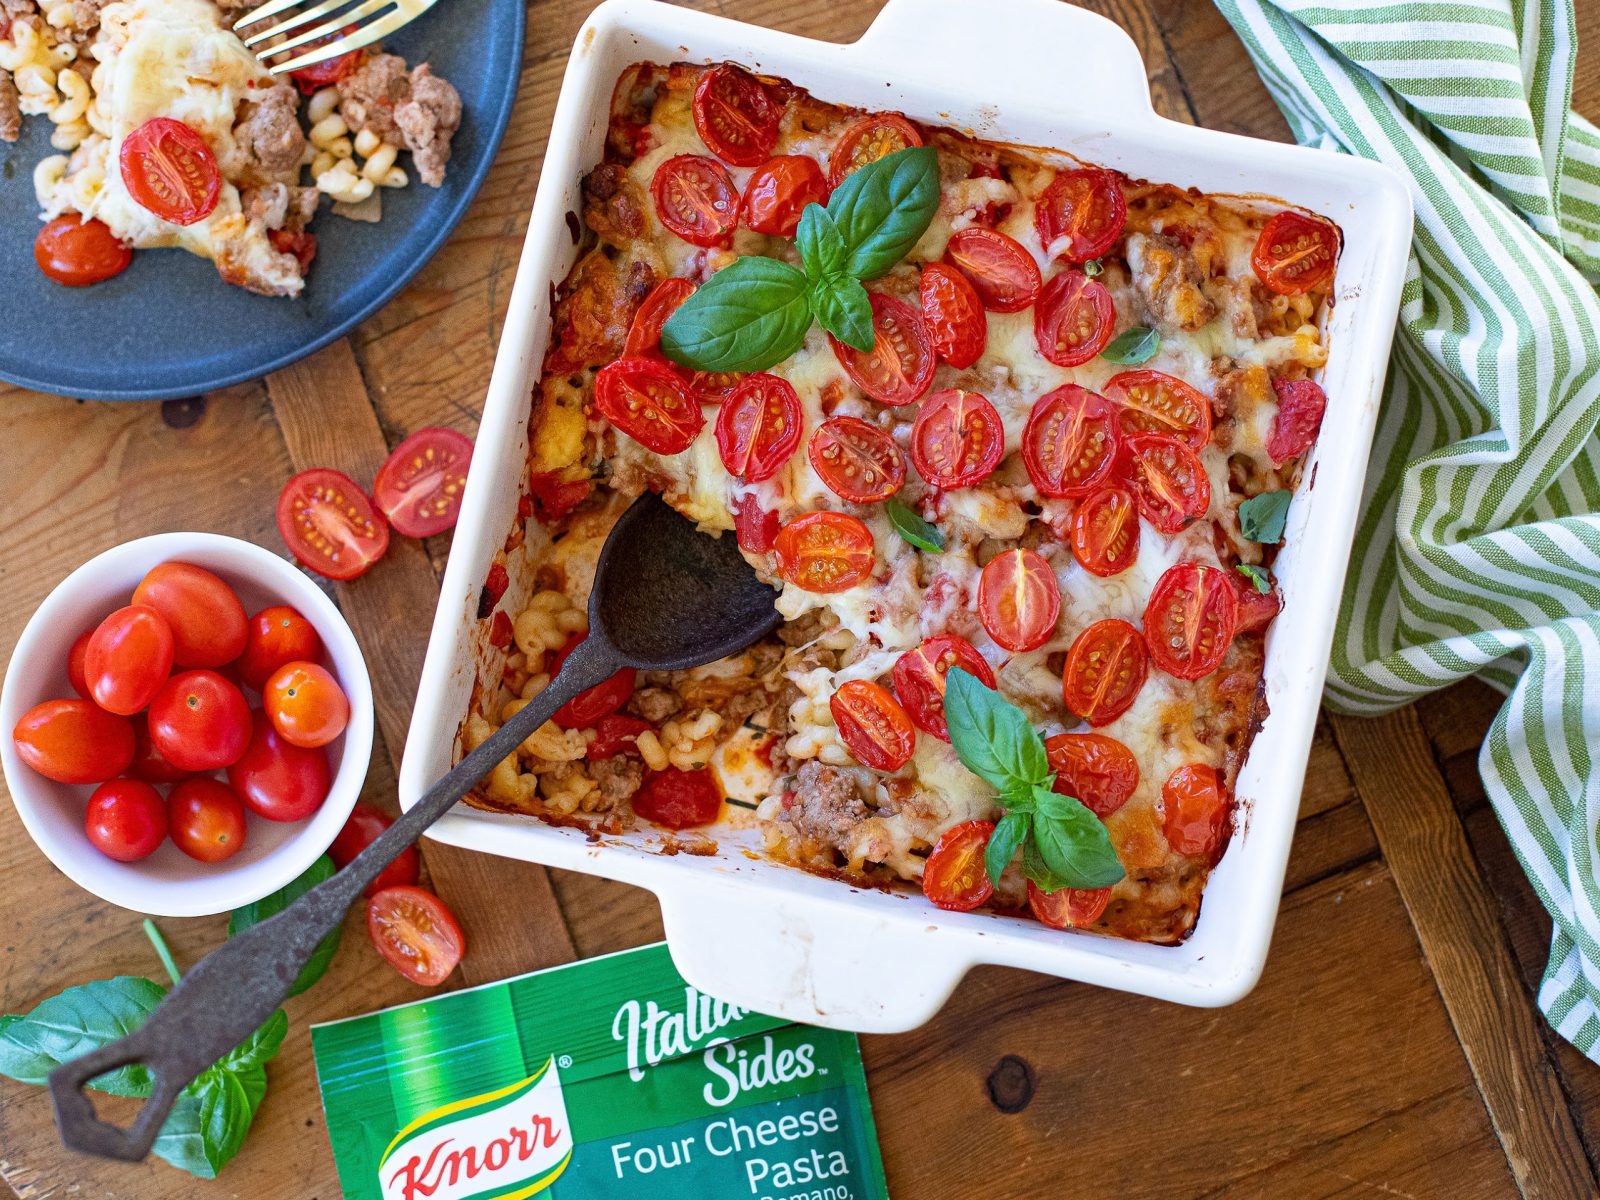 Get Everything You Need For Delicious Meals Like My Easy Italian Casserole & Save BIG At Publix